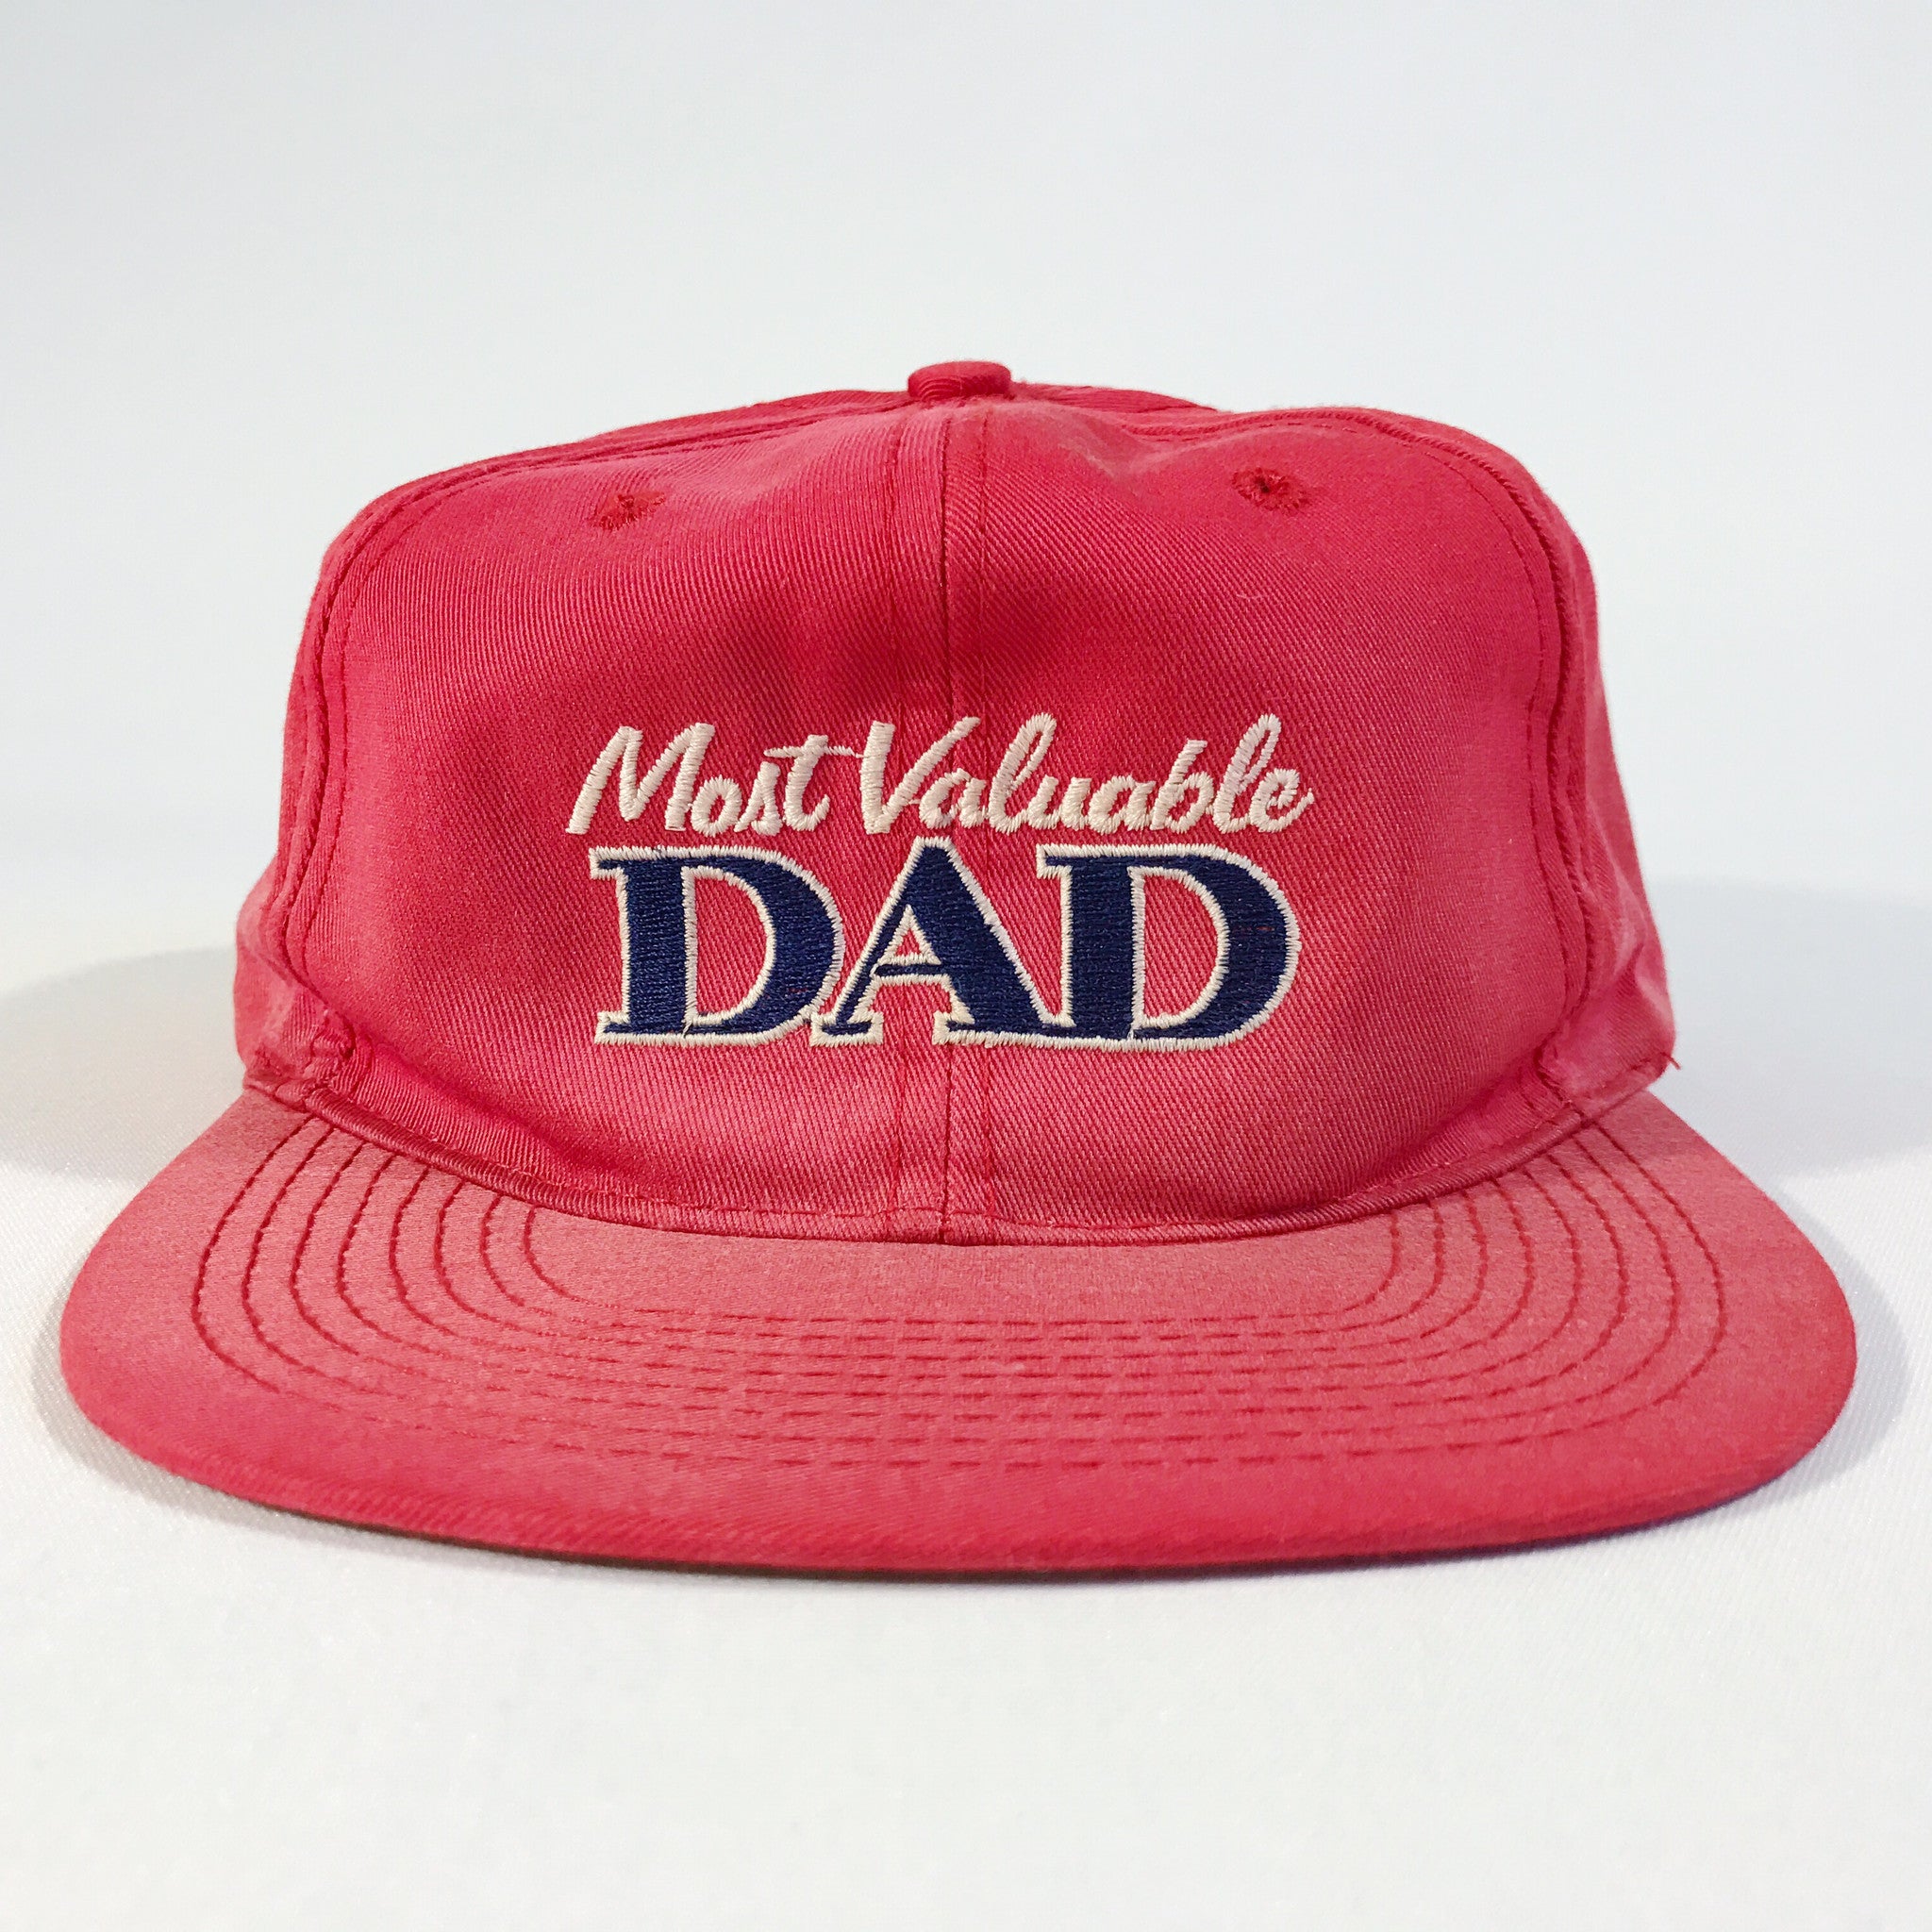 Macy's Most Valuable Dad Snapback